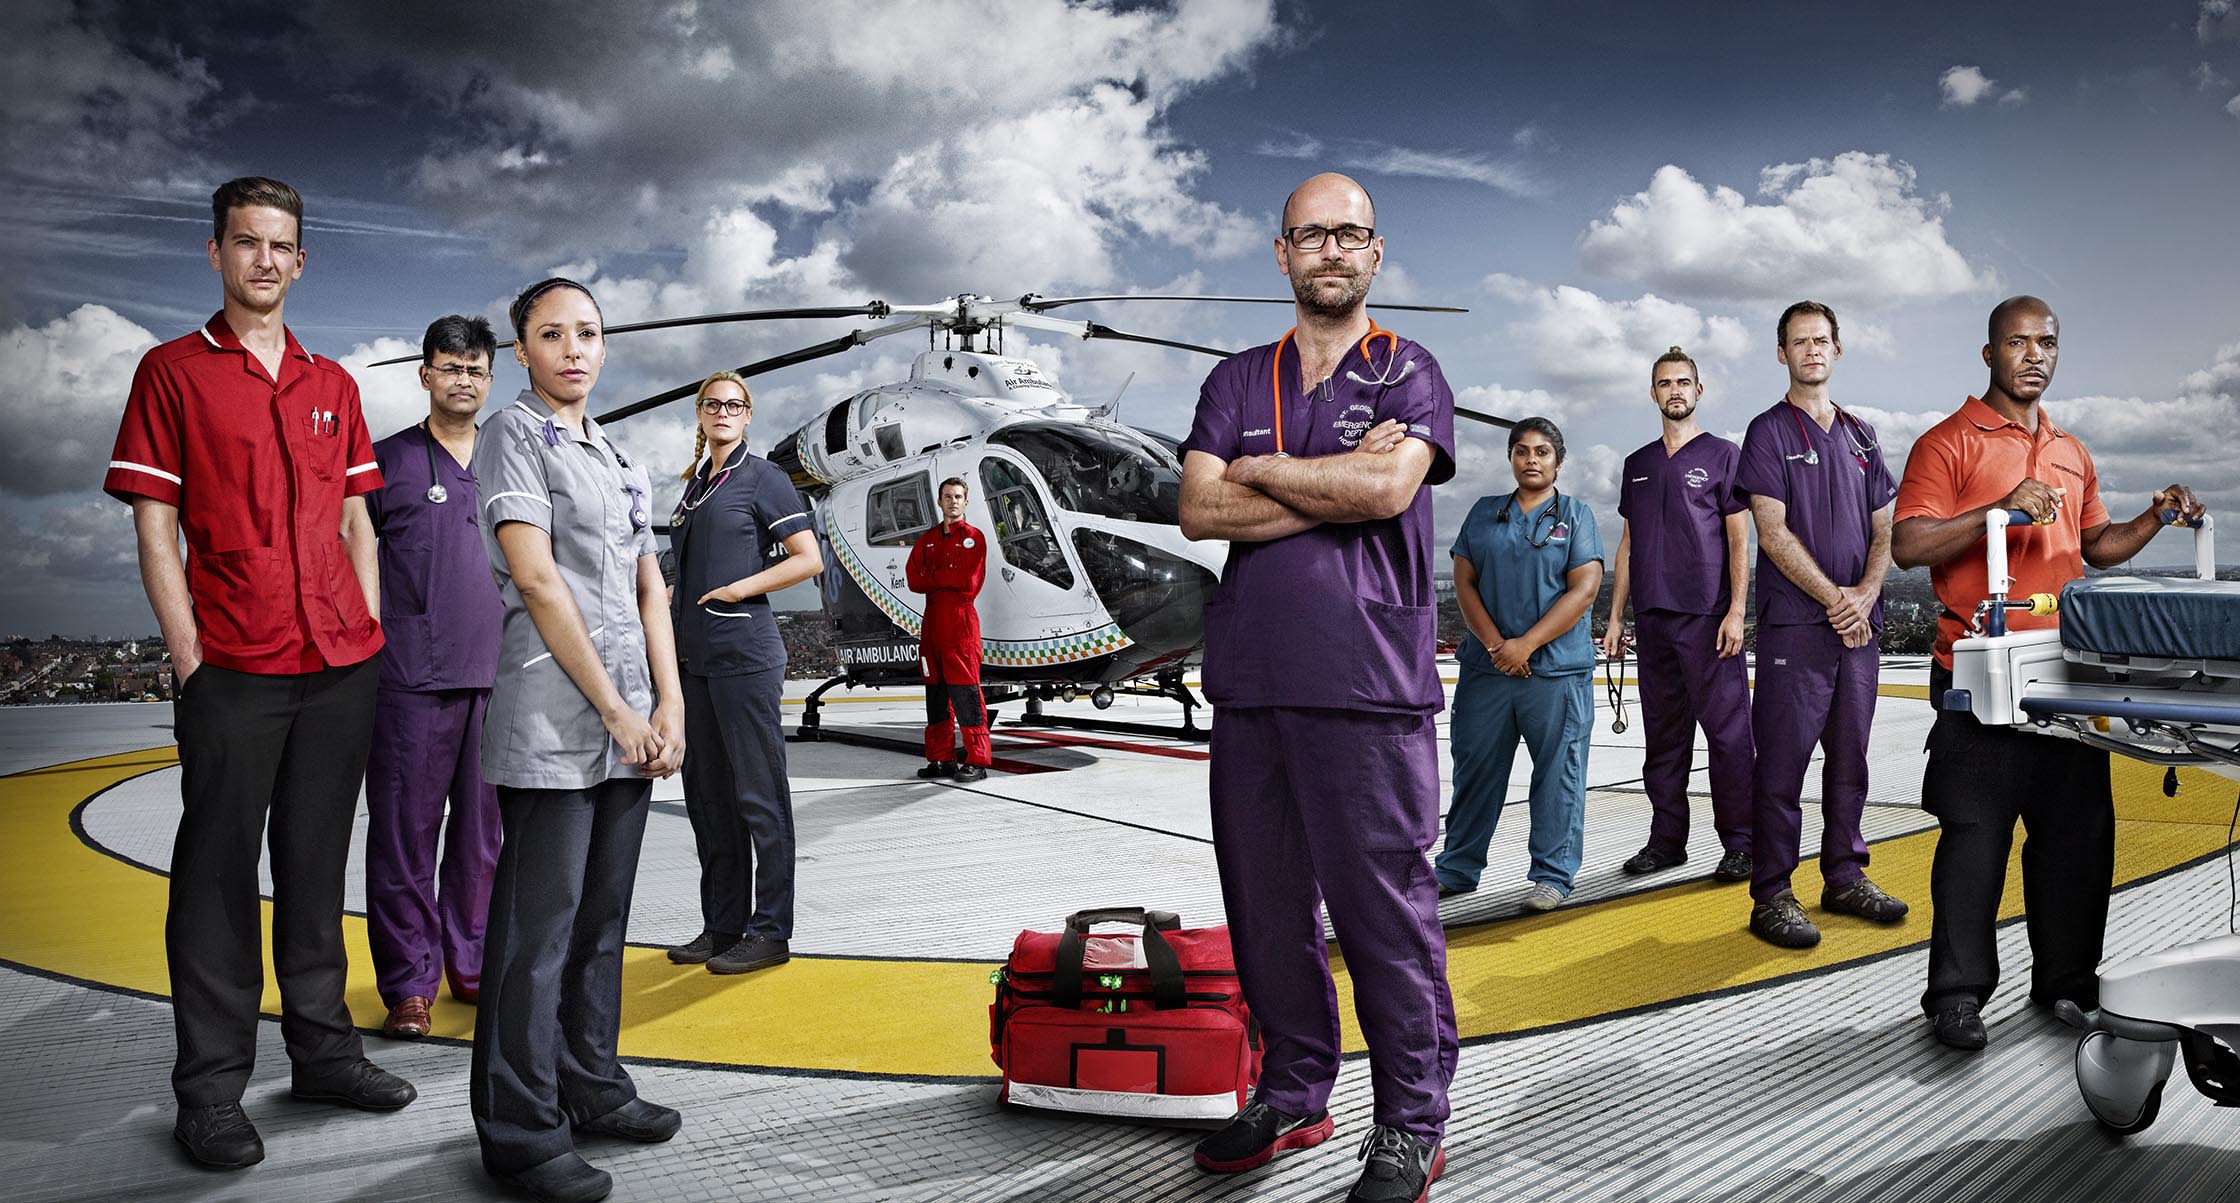 Netflix Embeds With UK Trauma Medics In Docuseries From ‘Squid Game: The Challenge’ Co-Producer The Garden